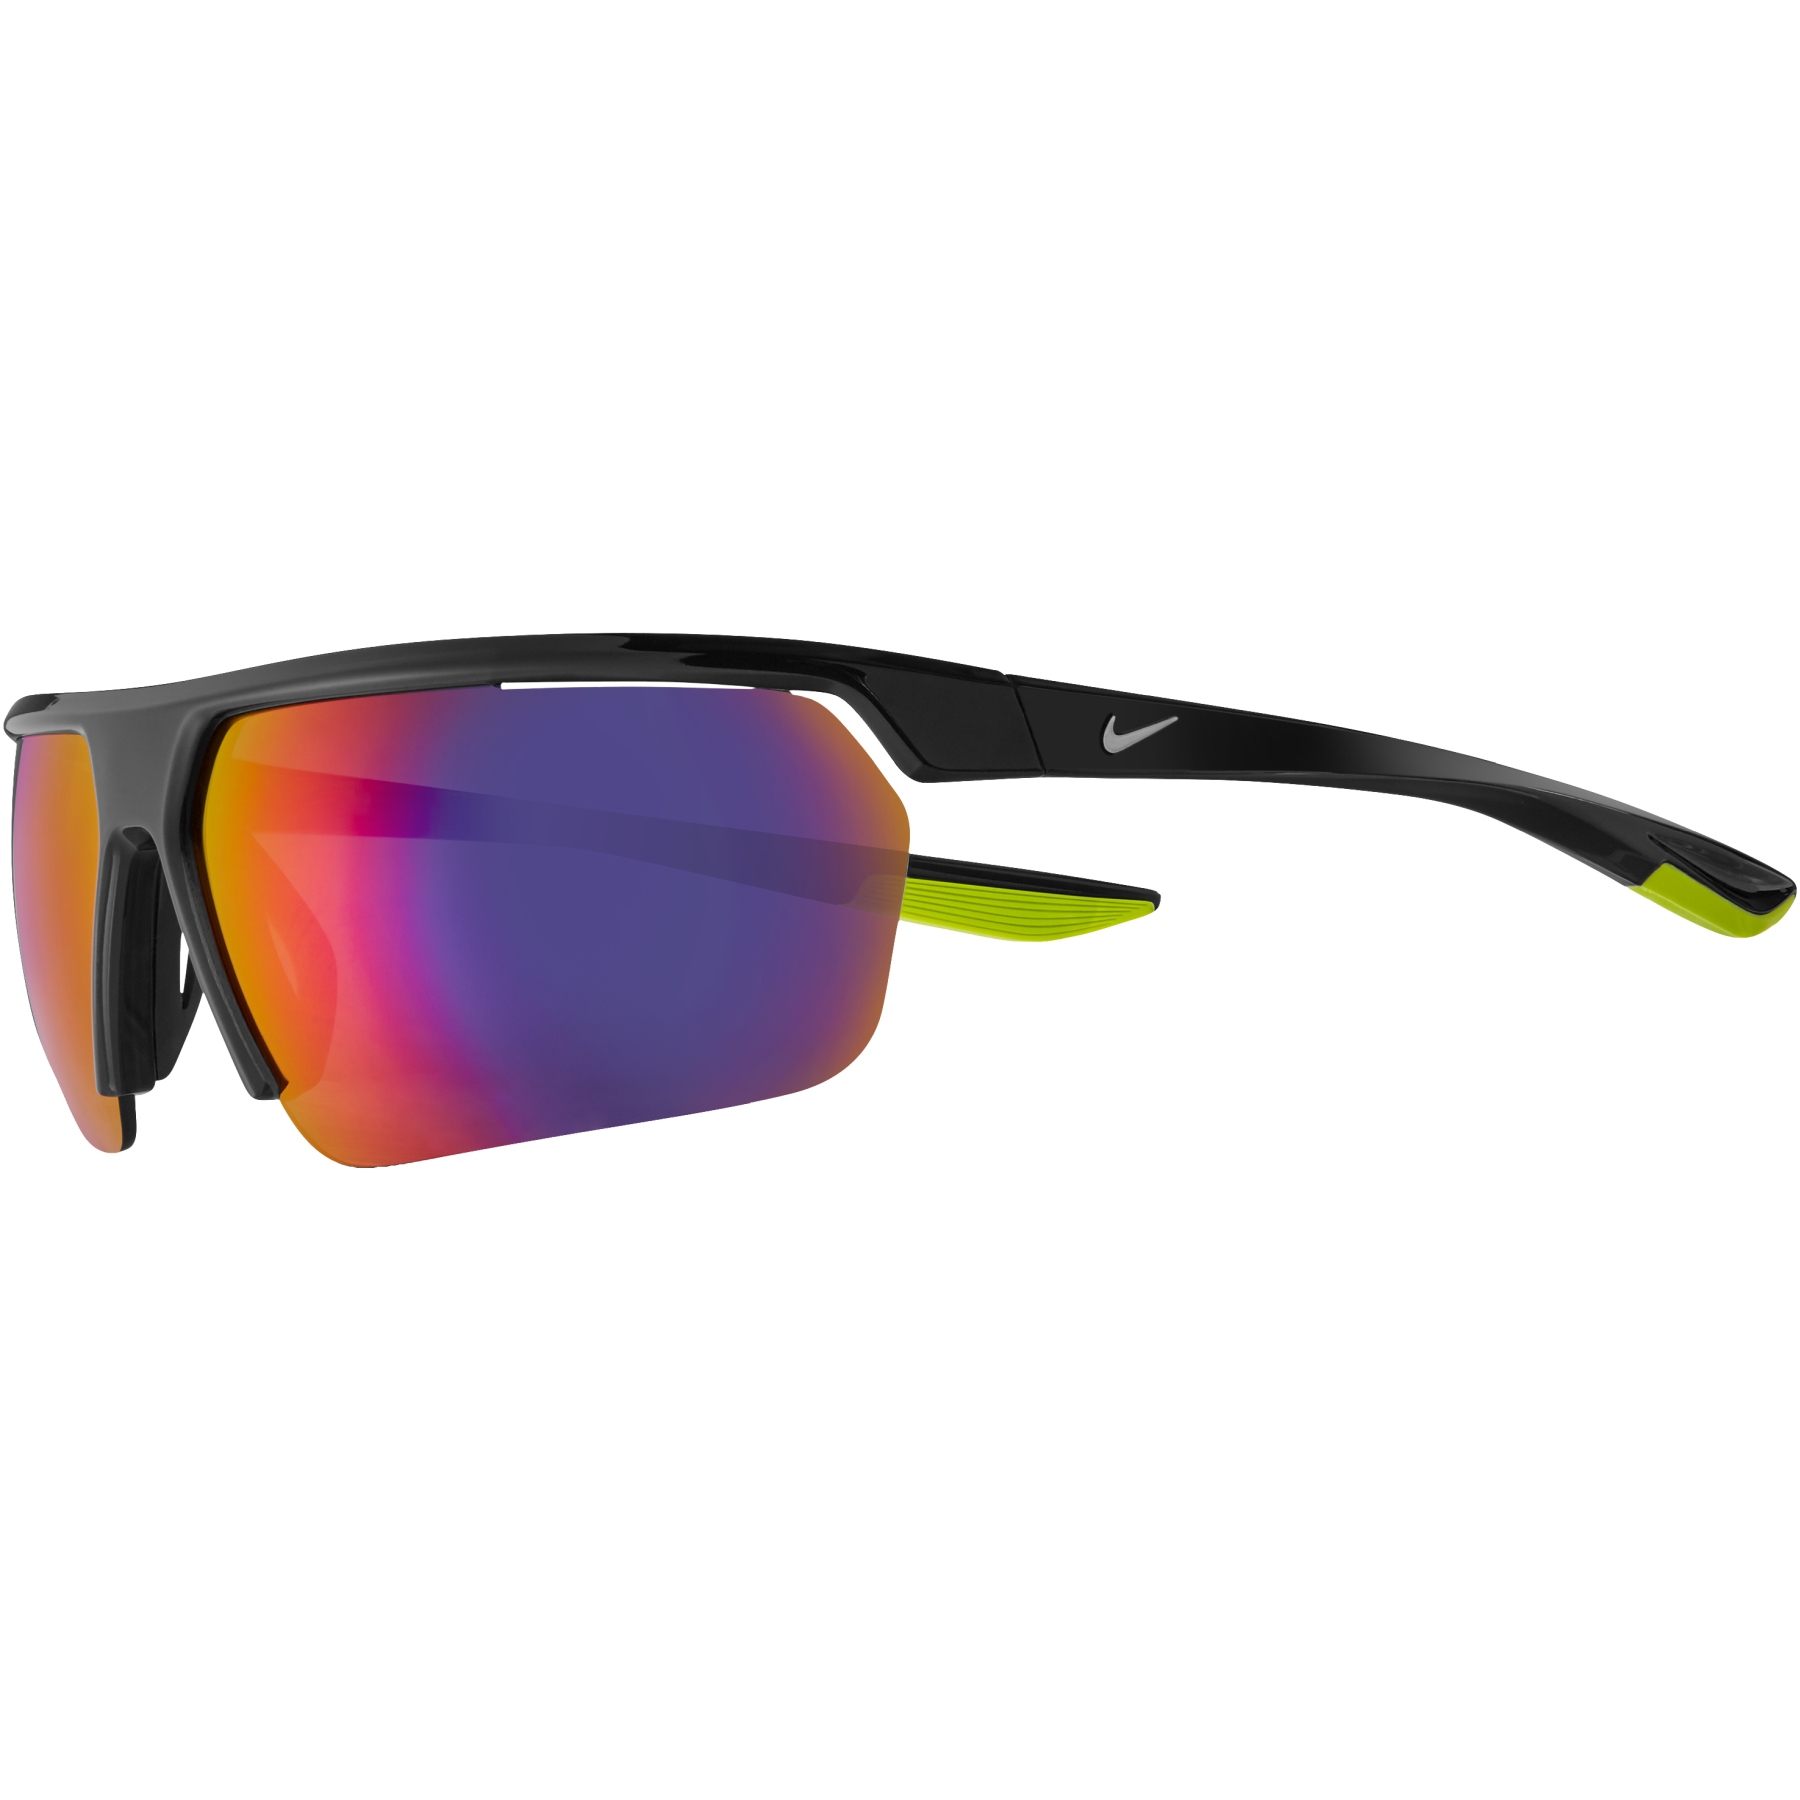 Productfoto van Nike Gale Force Zonnebril - anthracite/wolf grey | field tint lens 7113060